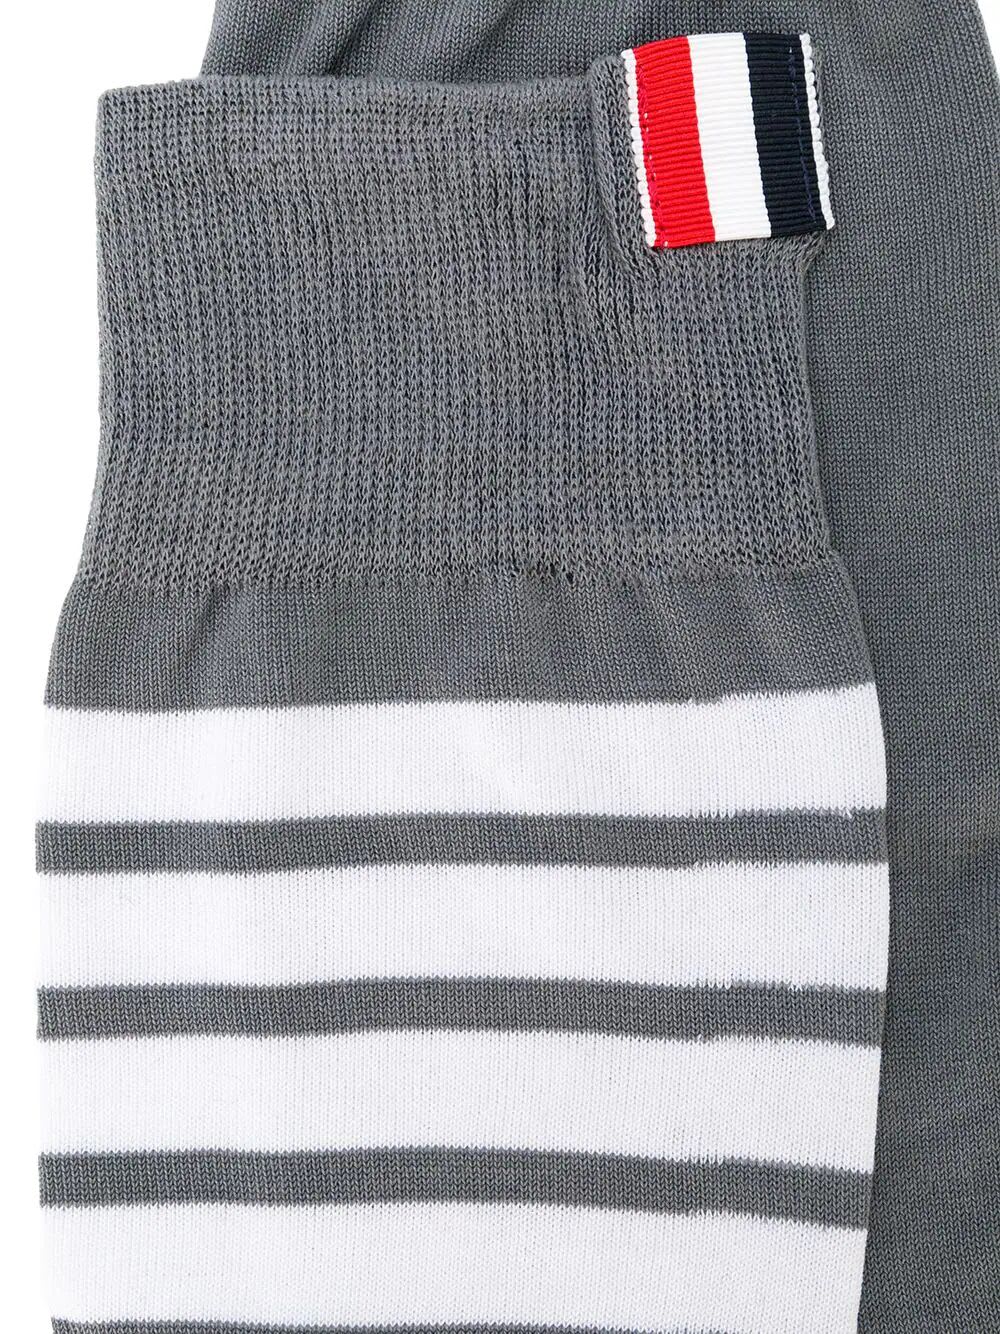 Shop Thom Browne Mid Calf Socks With 4 Bar In Med Grey